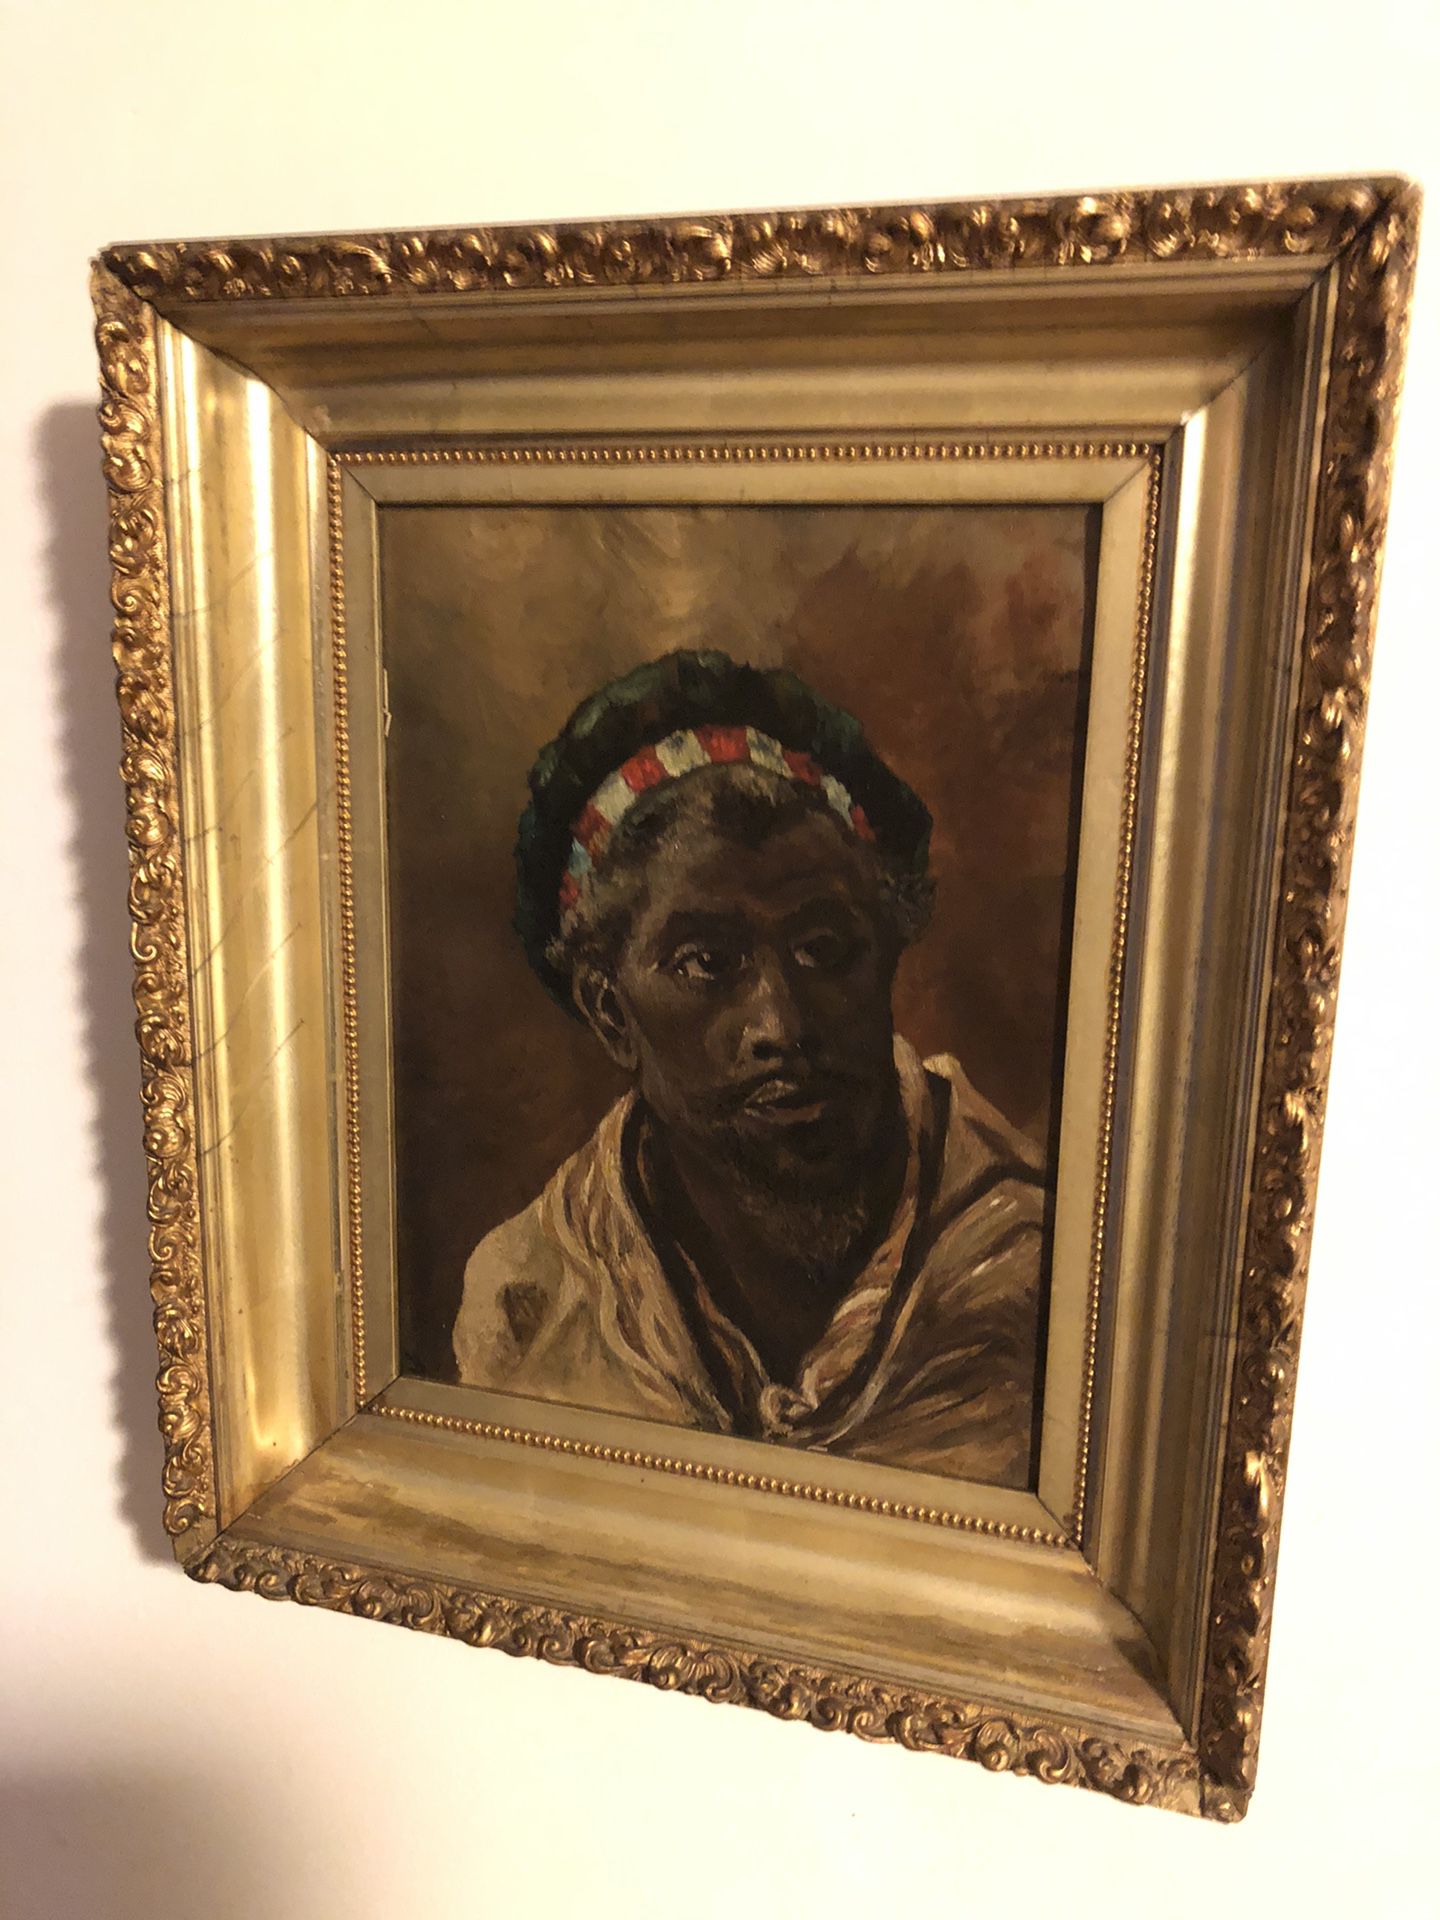 Antique Oil Painting of a Dark Man in a Cap